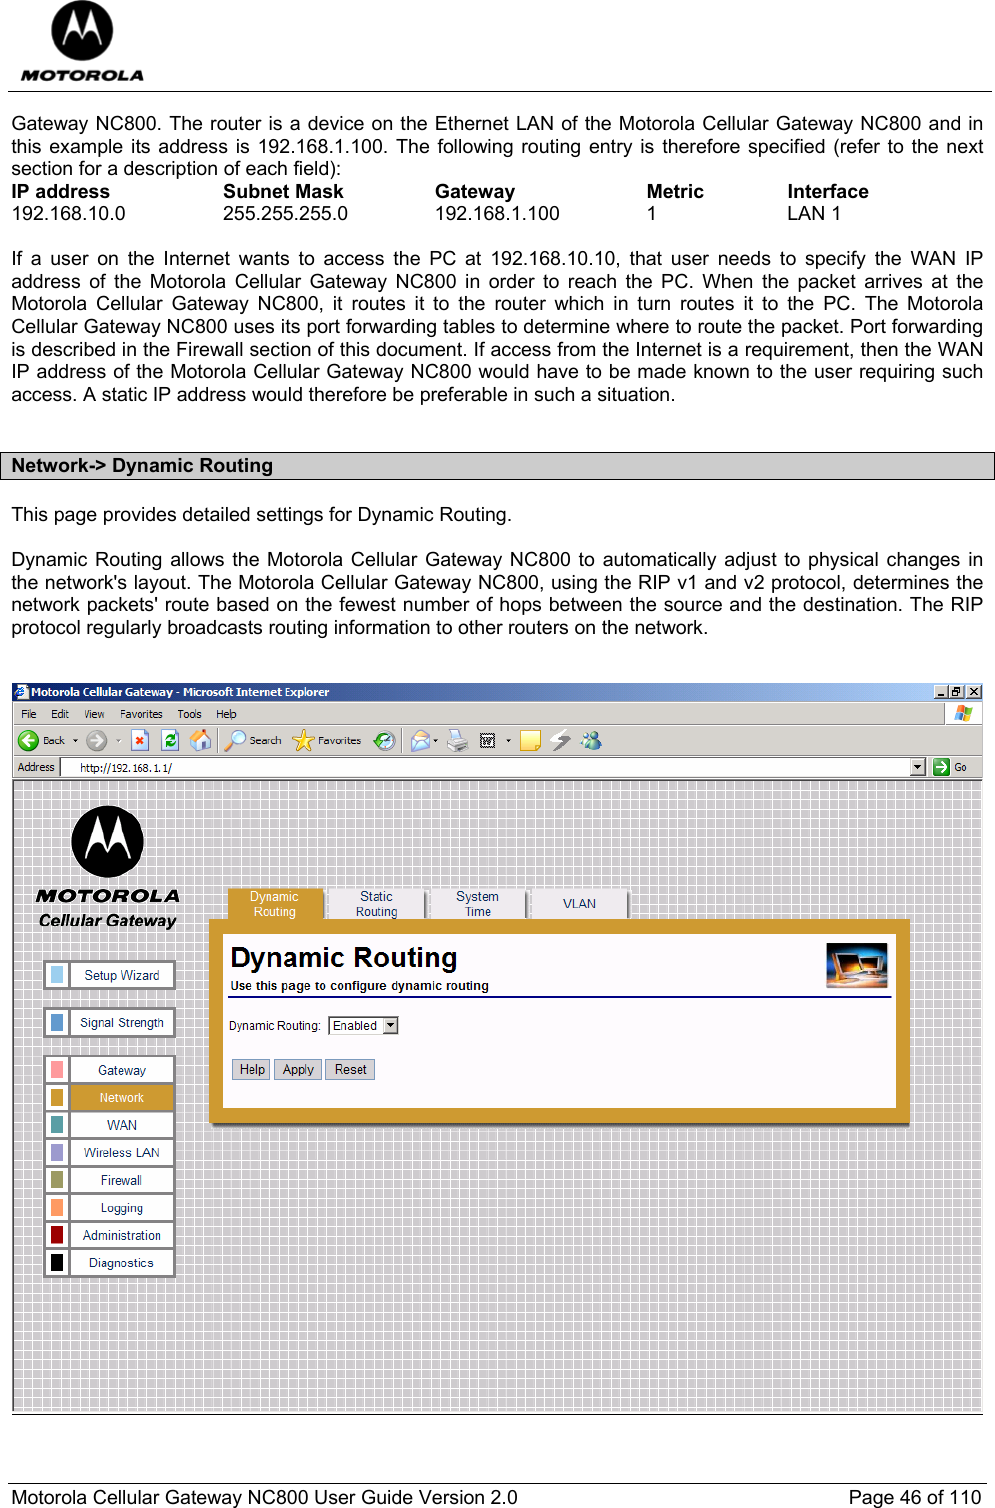  Motorola Cellular Gateway NC800 User Guide Version 2.0     Page 46 of 110  Gateway NC800. The router is a device on the Ethernet LAN of the Motorola Cellular Gateway NC800 and in this example its address is 192.168.1.100. The following routing entry is therefore specified (refer to the next section for a description of each field): IP address  Subnet Mask  Gateway  Metric  Interface 192.168.10.0   255.255.255.0  192.168.1.100  1  LAN 1  If a user on the Internet wants to access the PC at 192.168.10.10, that user needs to specify the WAN IP address of the Motorola Cellular Gateway NC800 in order to reach the PC. When the packet arrives at the Motorola Cellular Gateway NC800, it routes it to the router which in turn routes it to the PC. The Motorola Cellular Gateway NC800 uses its port forwarding tables to determine where to route the packet. Port forwarding is described in the Firewall section of this document. If access from the Internet is a requirement, then the WAN IP address of the Motorola Cellular Gateway NC800 would have to be made known to the user requiring such access. A static IP address would therefore be preferable in such a situation.  Network-&gt; Dynamic Routing This page provides detailed settings for Dynamic Routing.  Dynamic Routing allows the Motorola Cellular Gateway NC800 to automatically adjust to physical changes in the network&apos;s layout. The Motorola Cellular Gateway NC800, using the RIP v1 and v2 protocol, determines the network packets&apos; route based on the fewest number of hops between the source and the destination. The RIP protocol regularly broadcasts routing information to other routers on the network.      